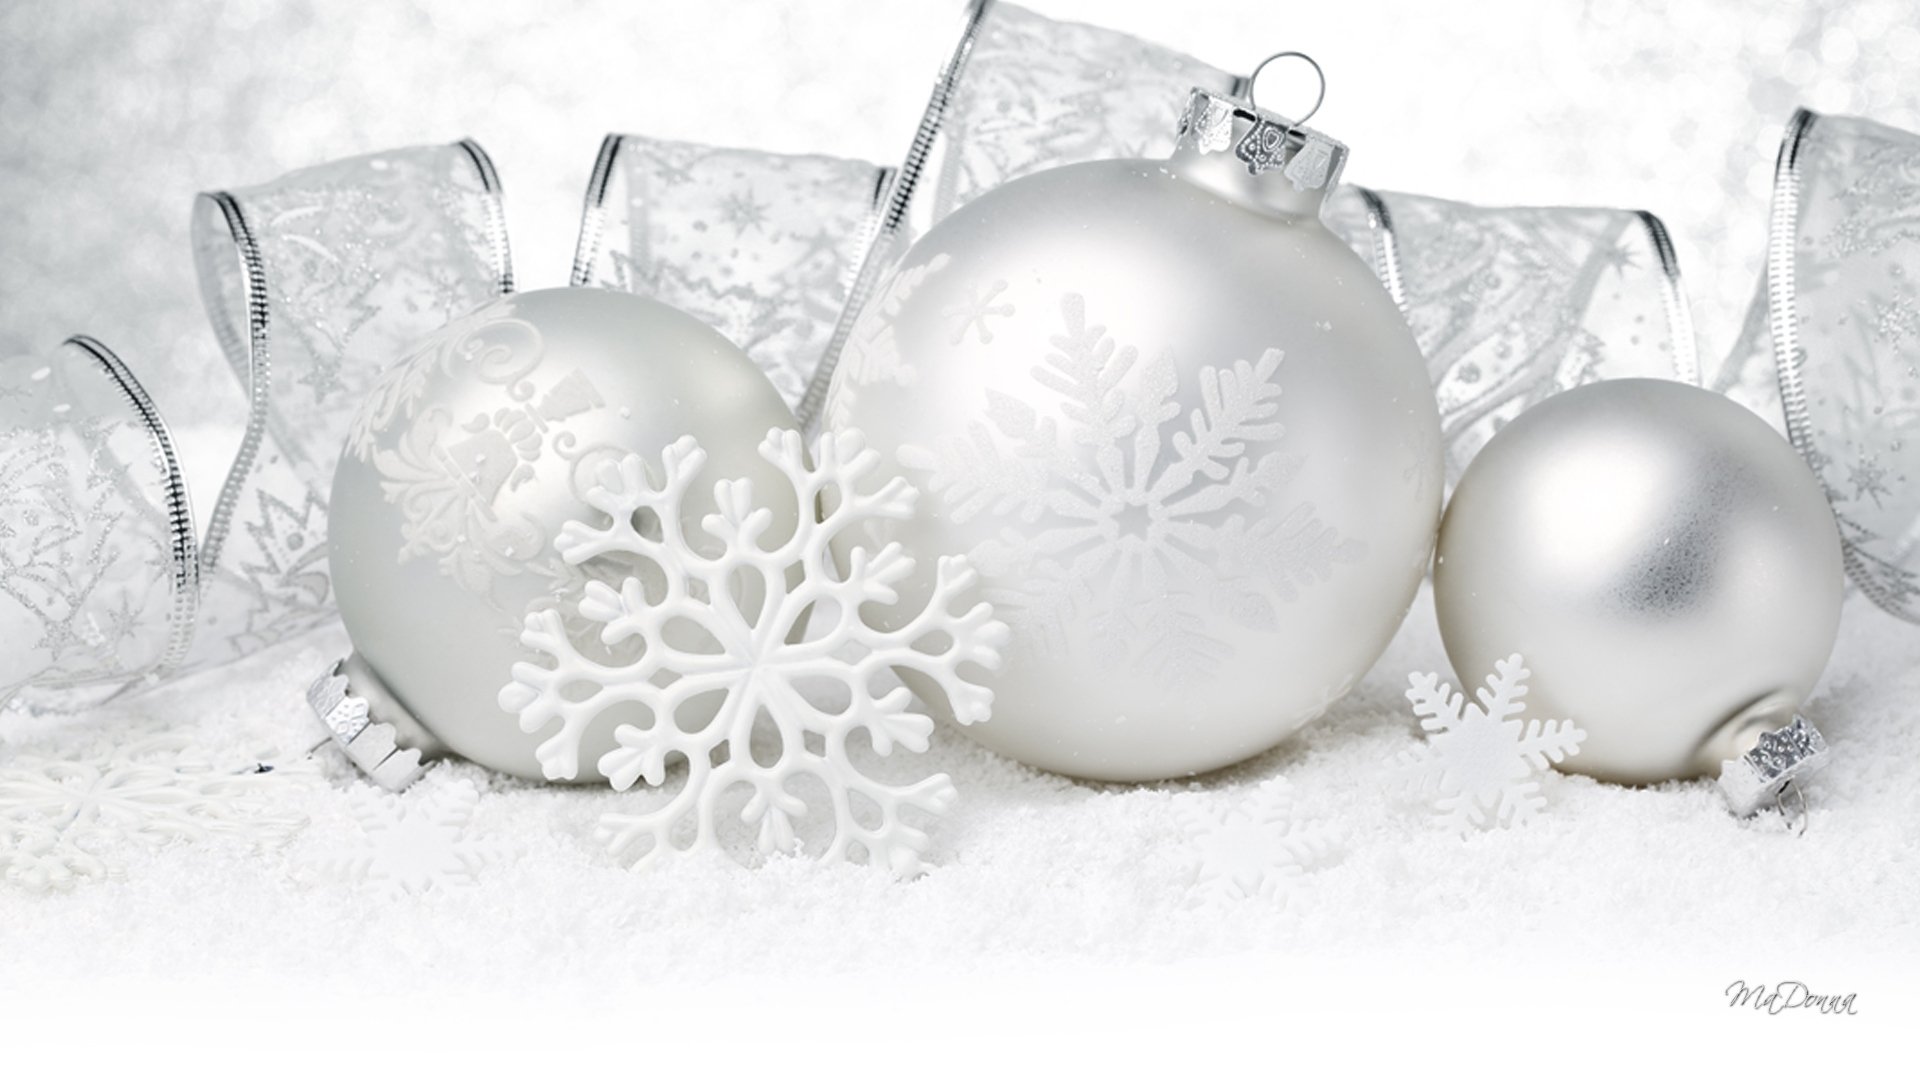 Download Silver White Christmas Ornaments Holiday Christmas  HD Wallpaper by MaDonna